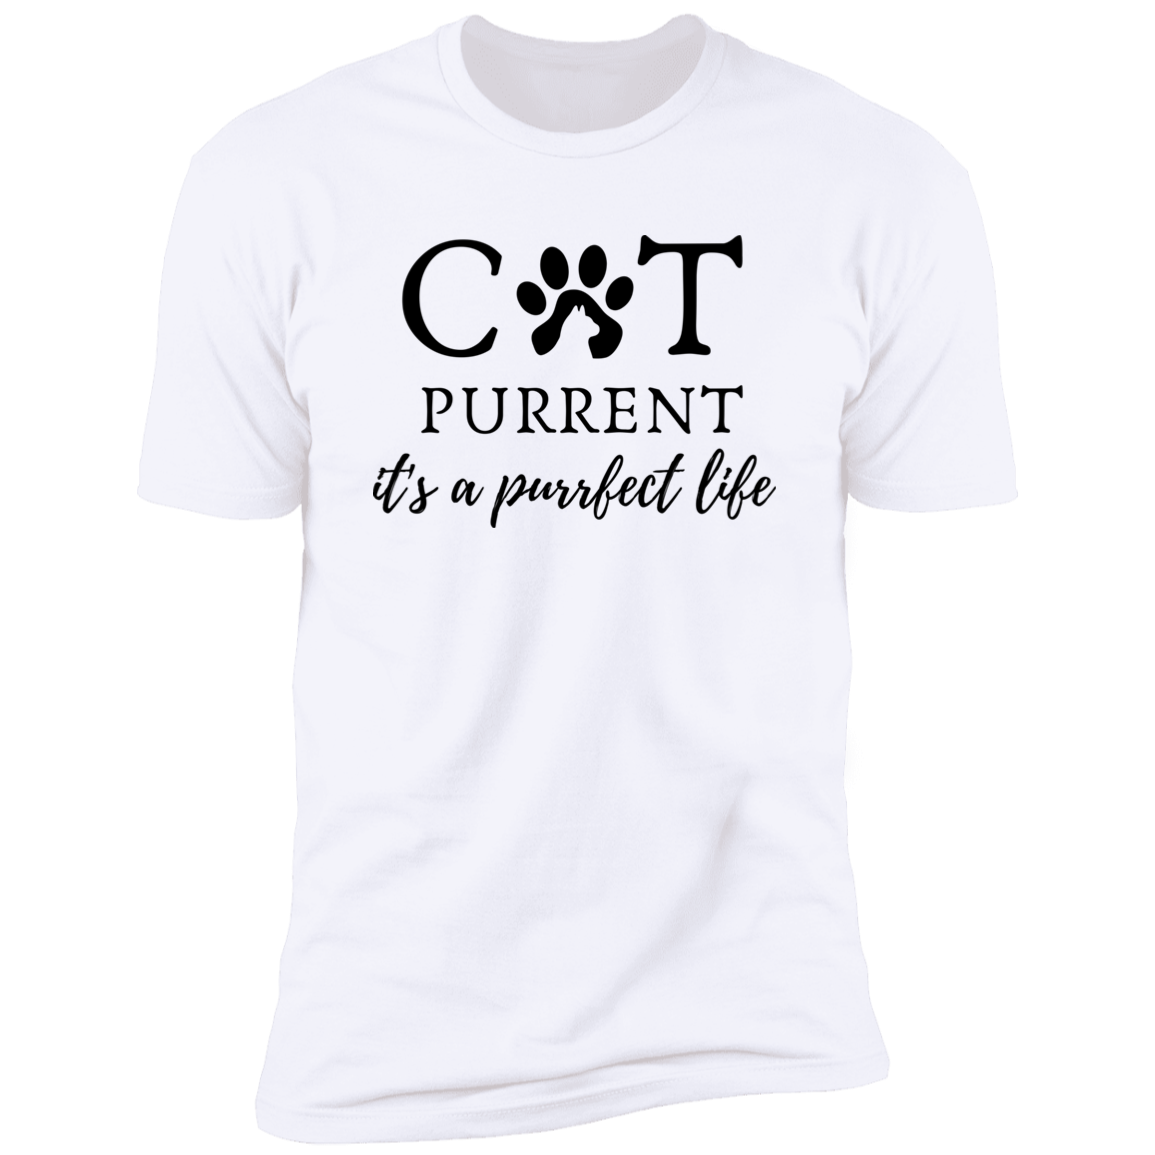 Cat Purrent It's a Purrfect Life T-shirt, Cat Parent Shirt for humans, in white